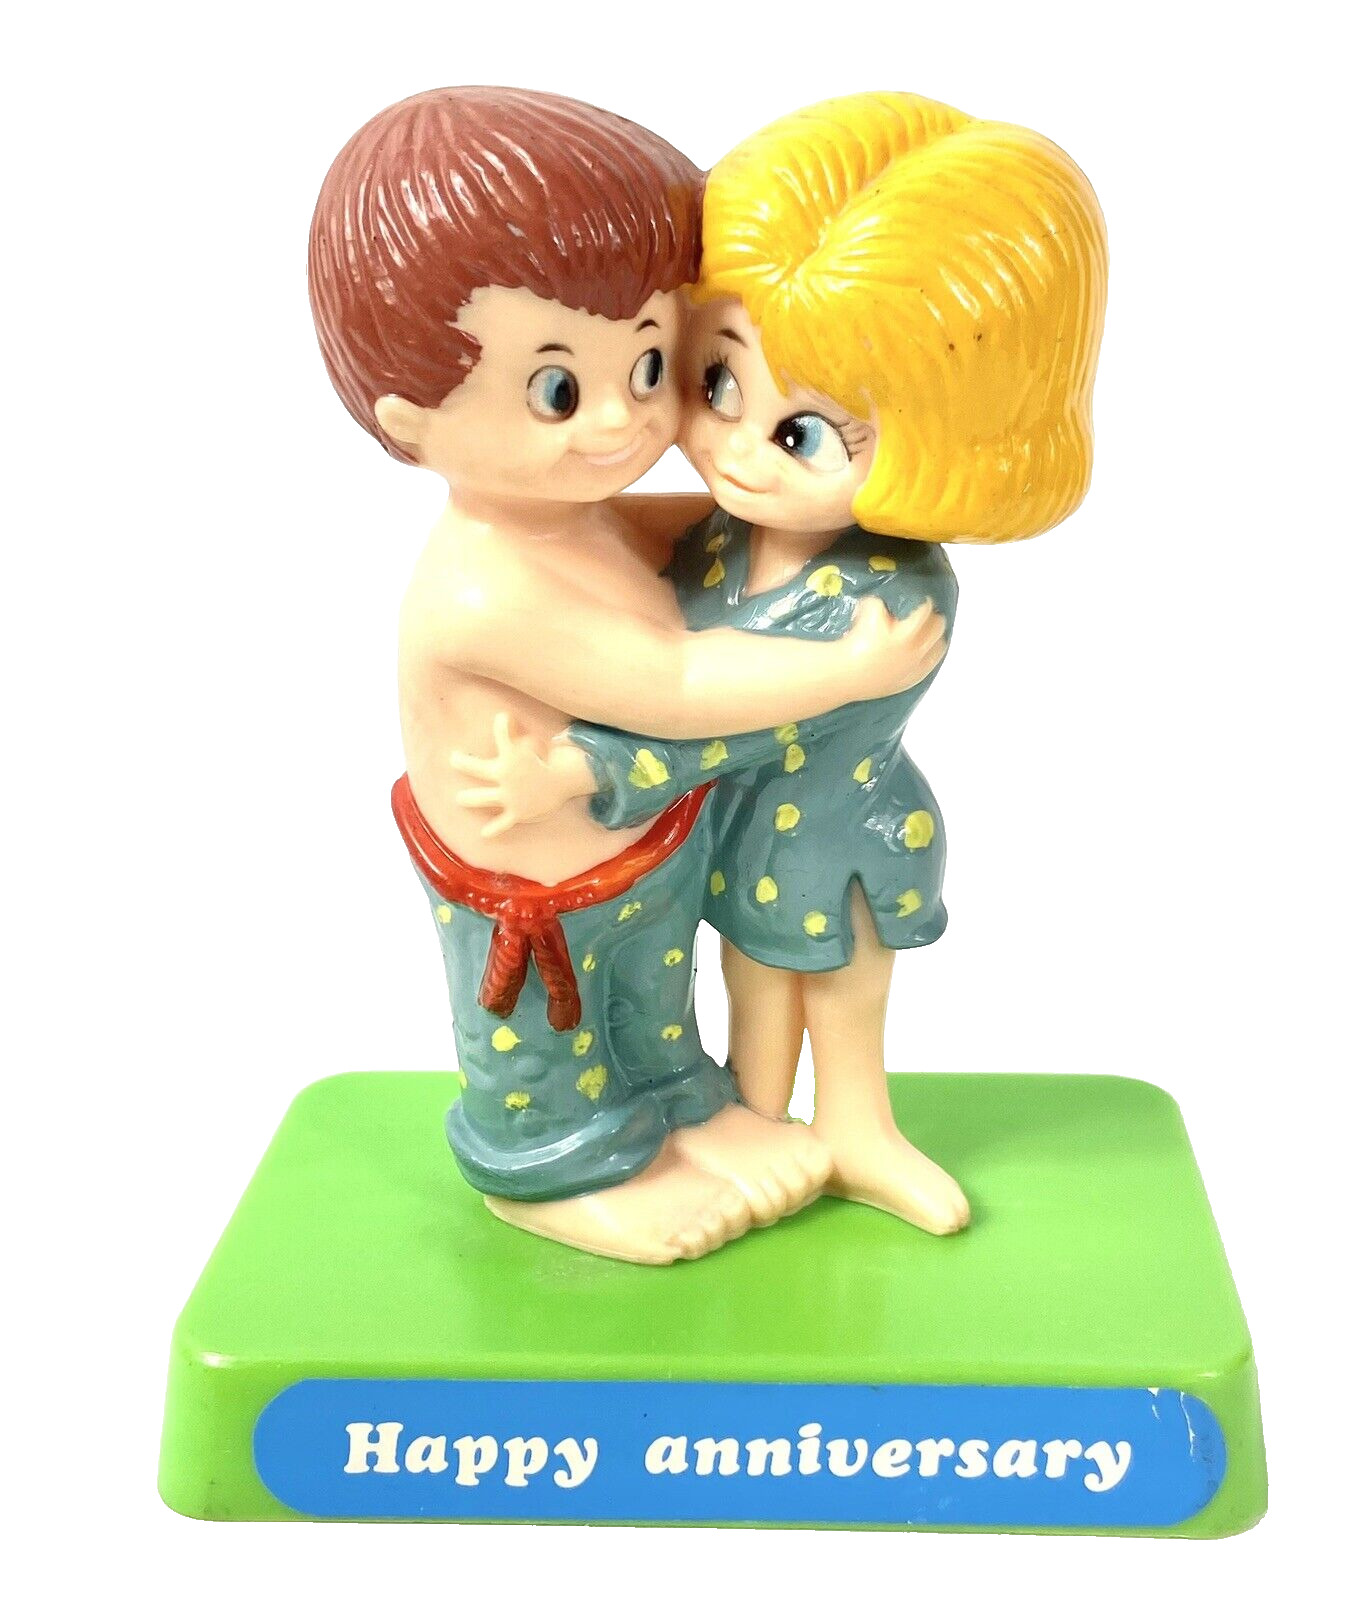 Berries Vintage 1971 Happy Anniversary Marriage Cake Topper Kitsch Couple